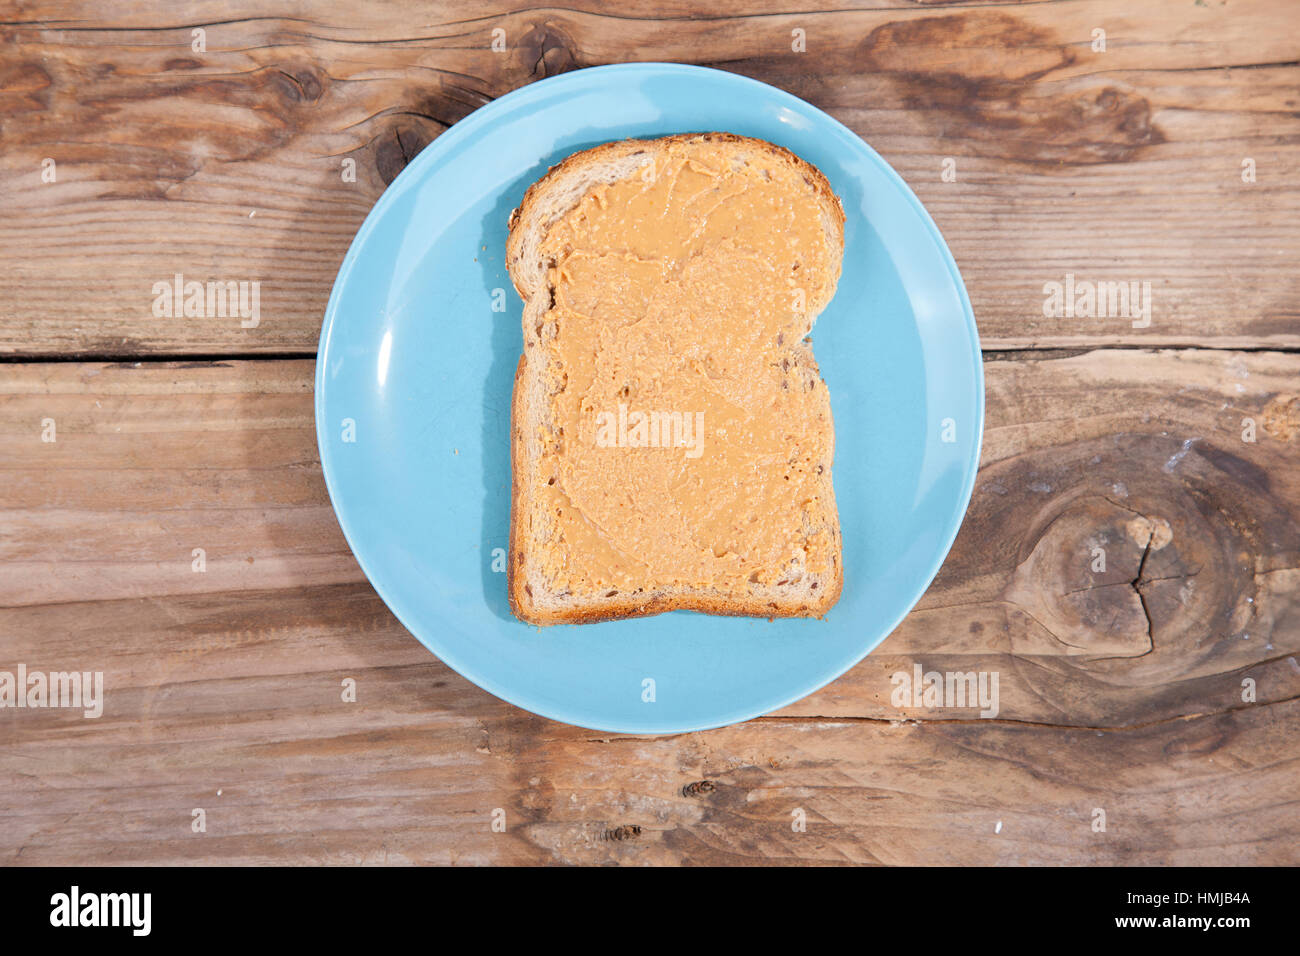 Bread with peanut butter on wooden background Stock Photo